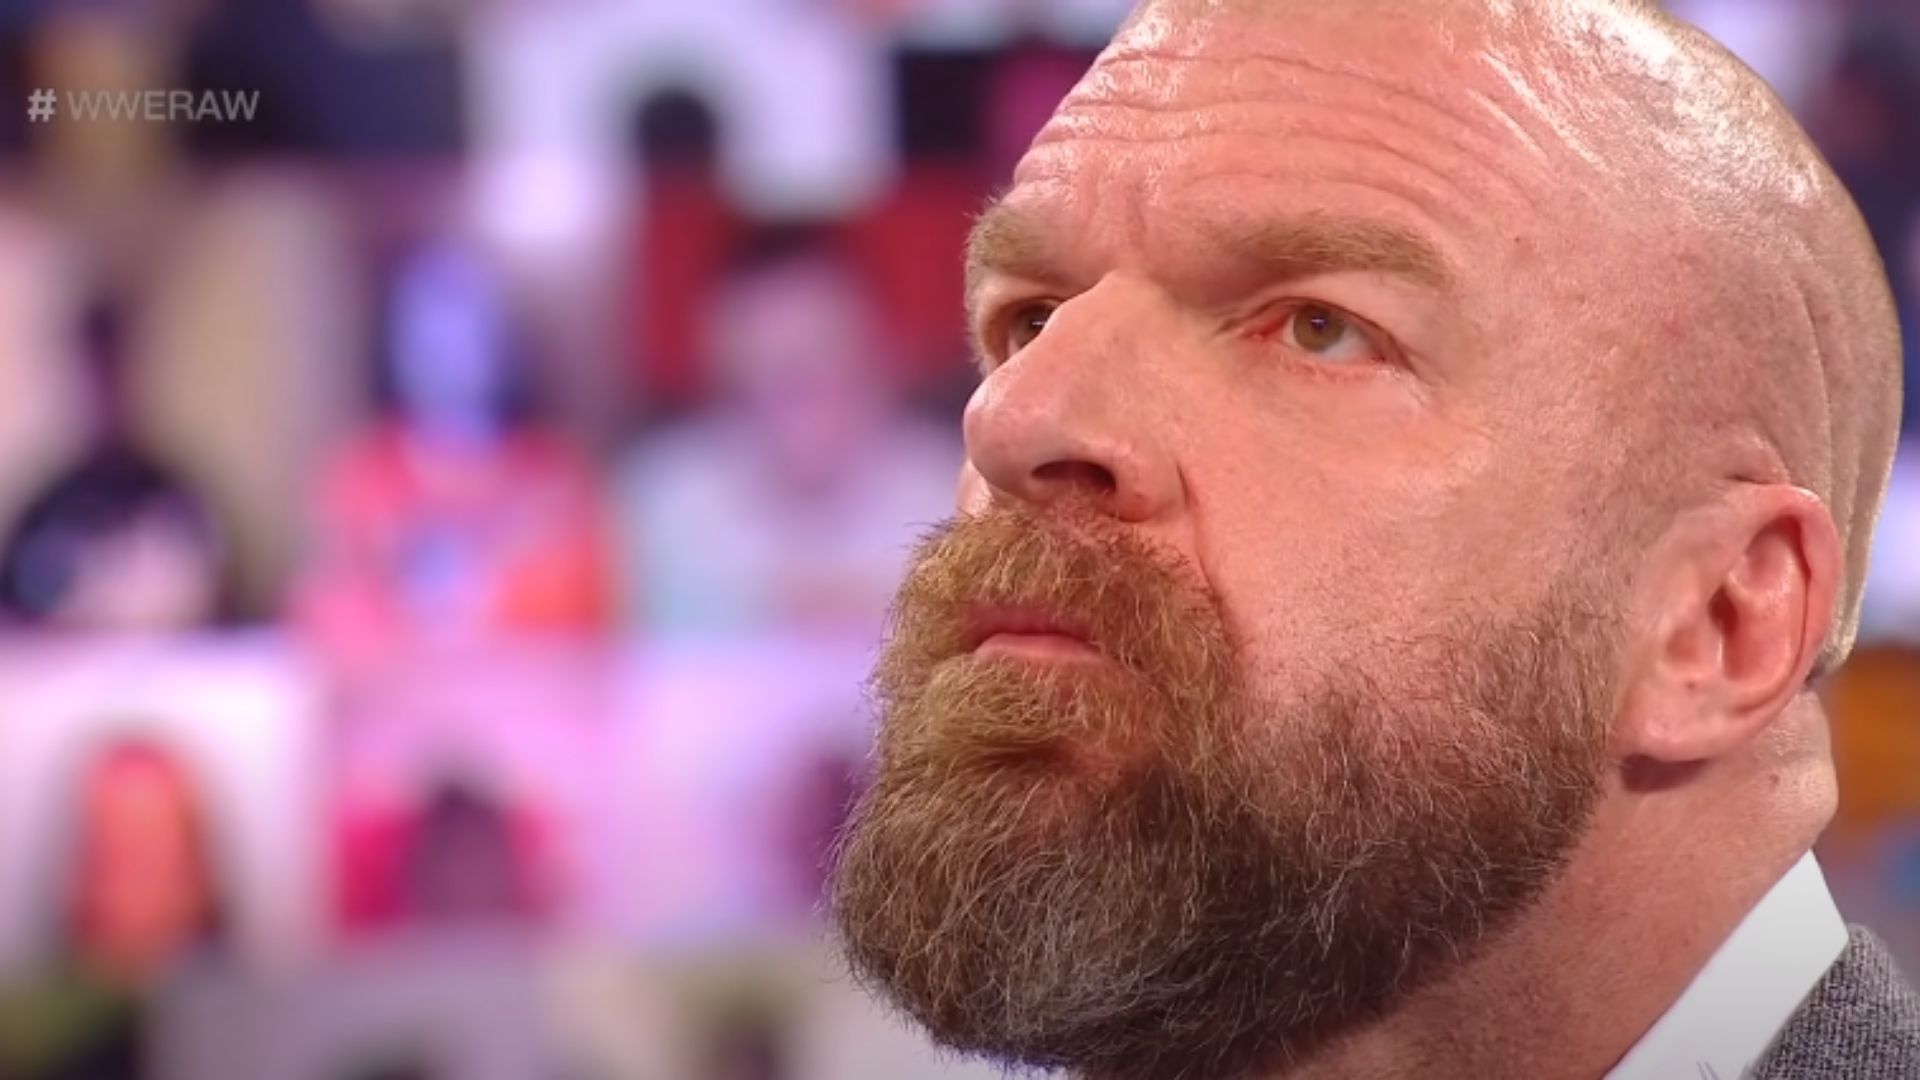 Triple H is a WWE executive and 14-time World Champion